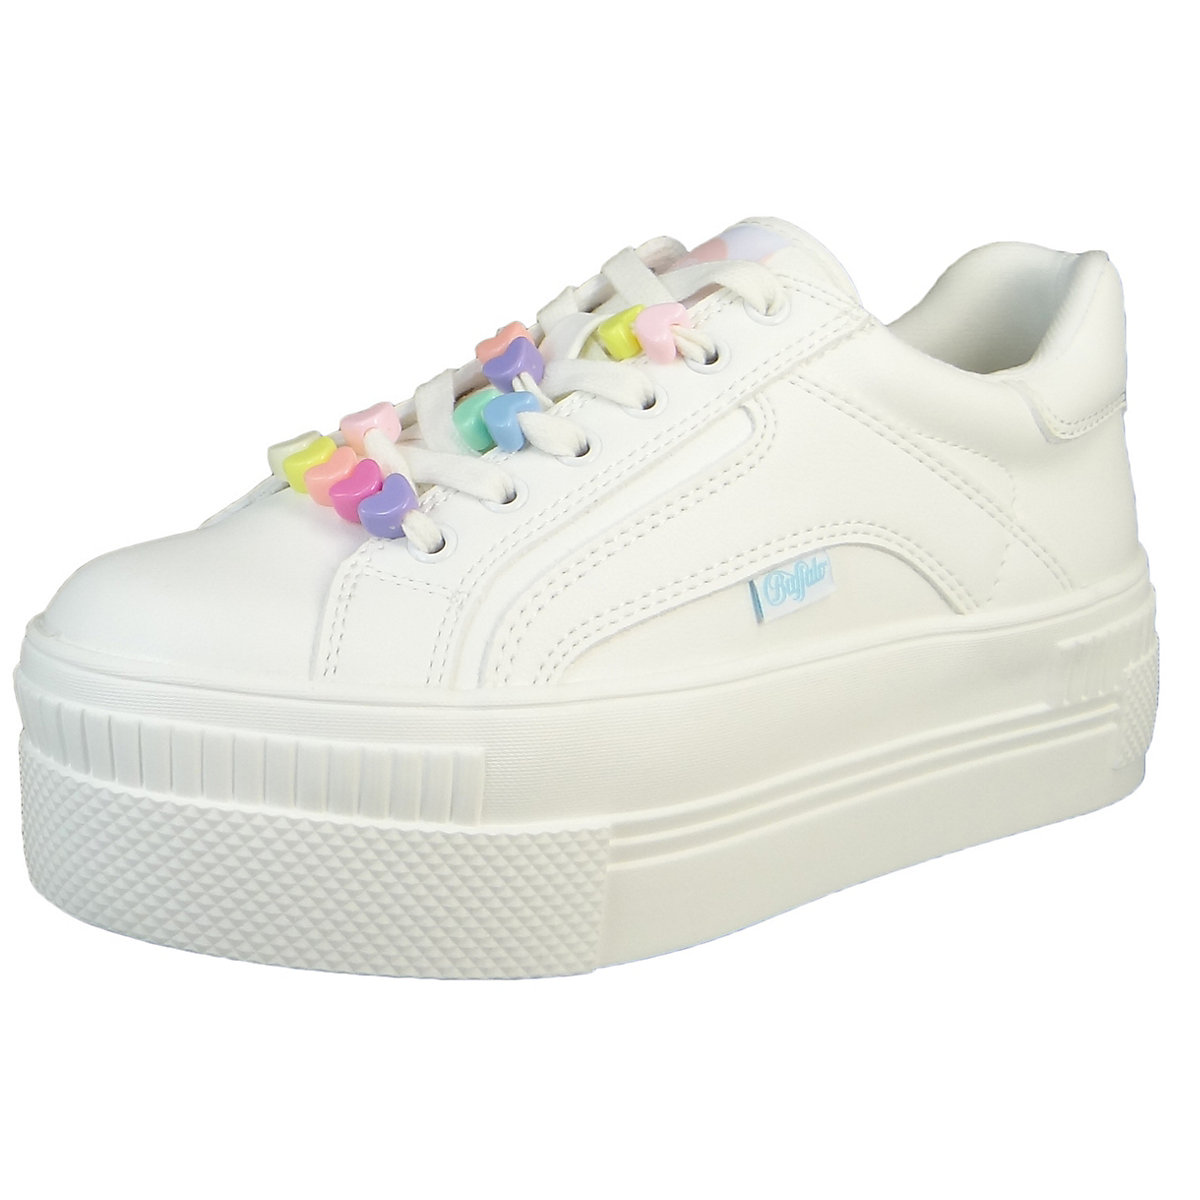 BUFFALO Damen Low Sneaker Paired Candy Low Top 1630900 Weiß White Textil Sneakers Low weiß